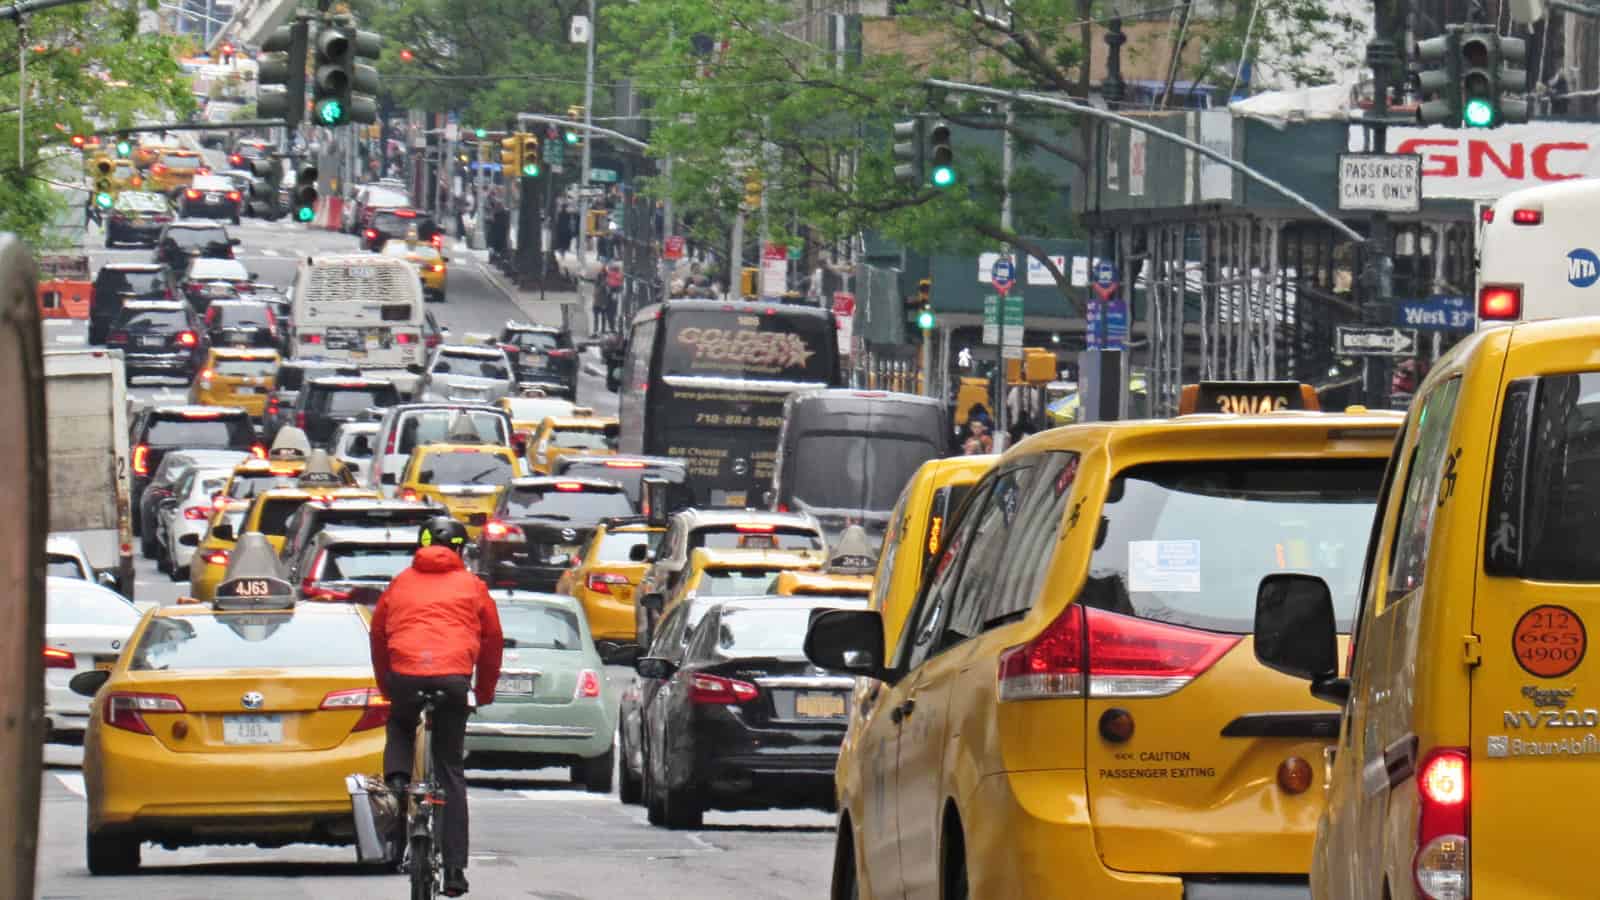 Yellow taxicabs, bicycle messengers and private cars jockey for space on 5th Ave. in midtown Manhattan